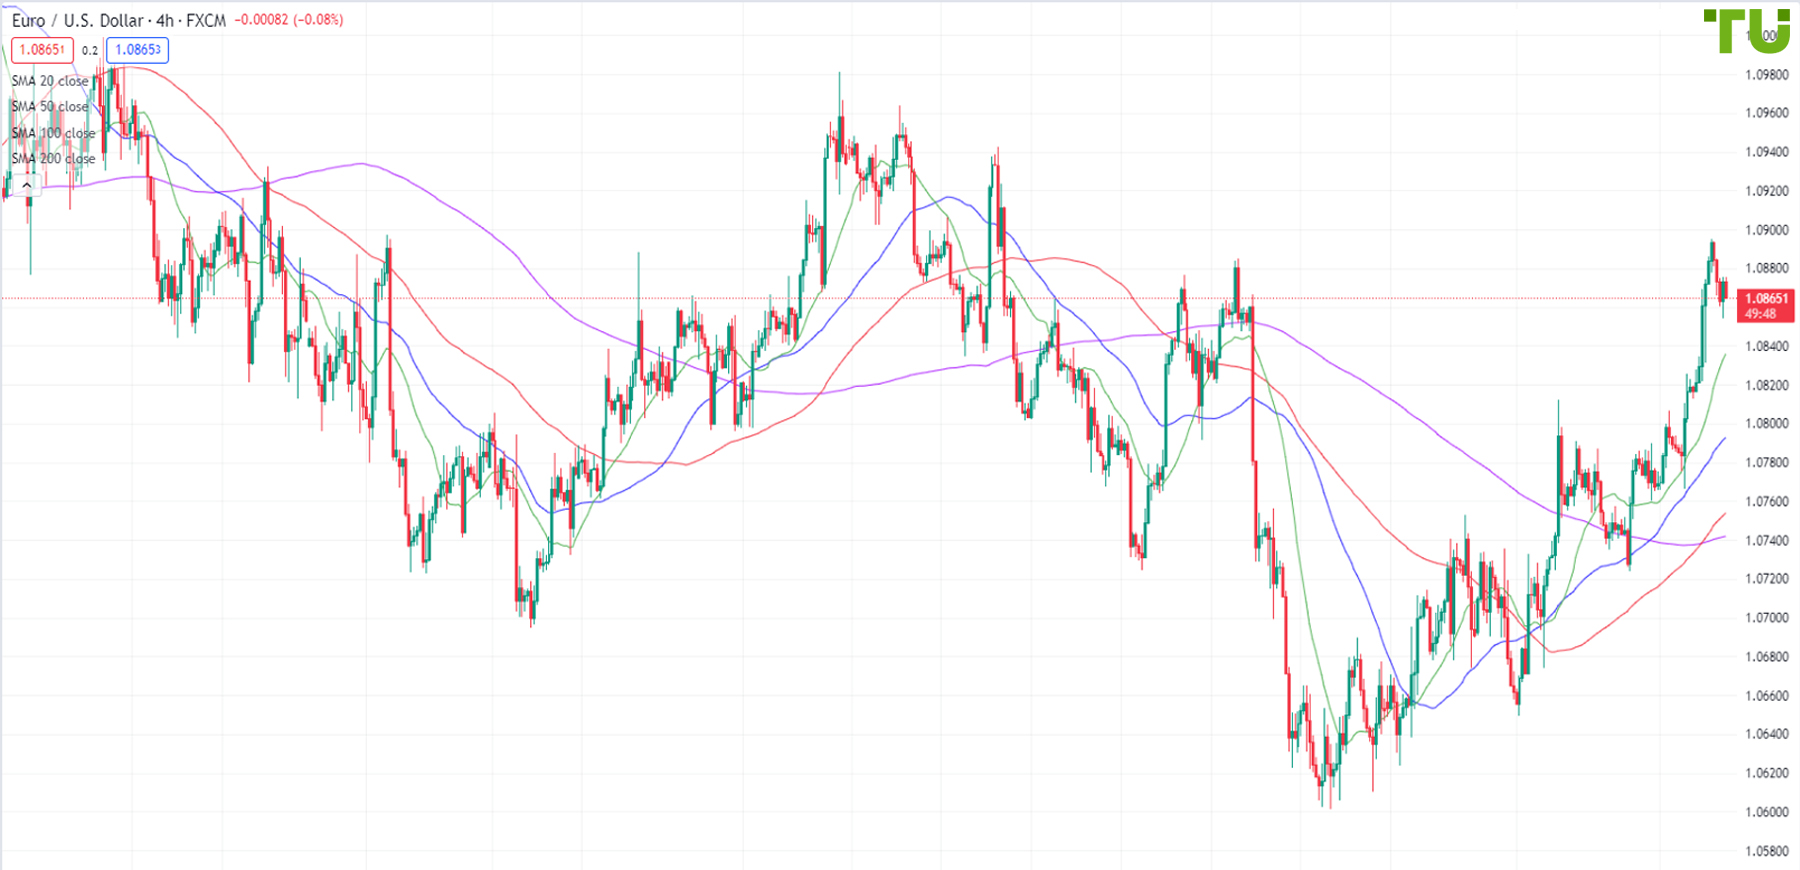 EUR/USD failed to continue its rally yesterday, driven by weak U.S. CPI